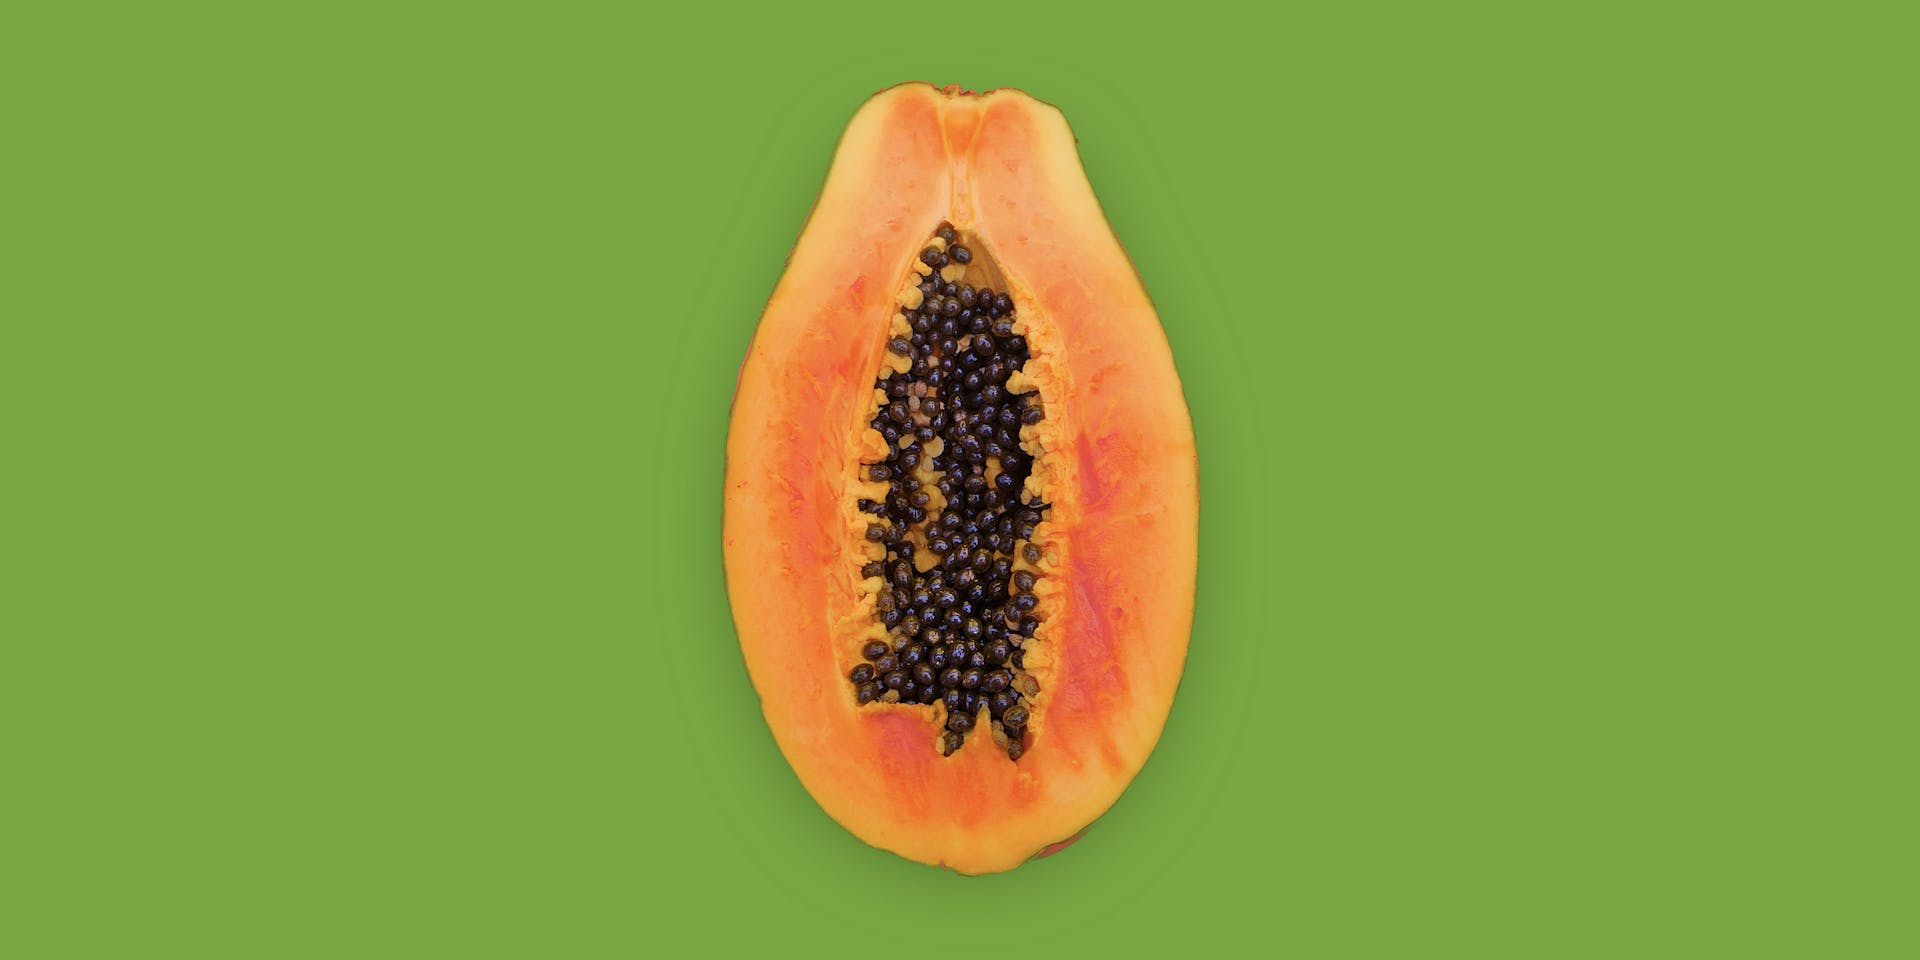 An orange papaya sliced in half sits against a grass green background